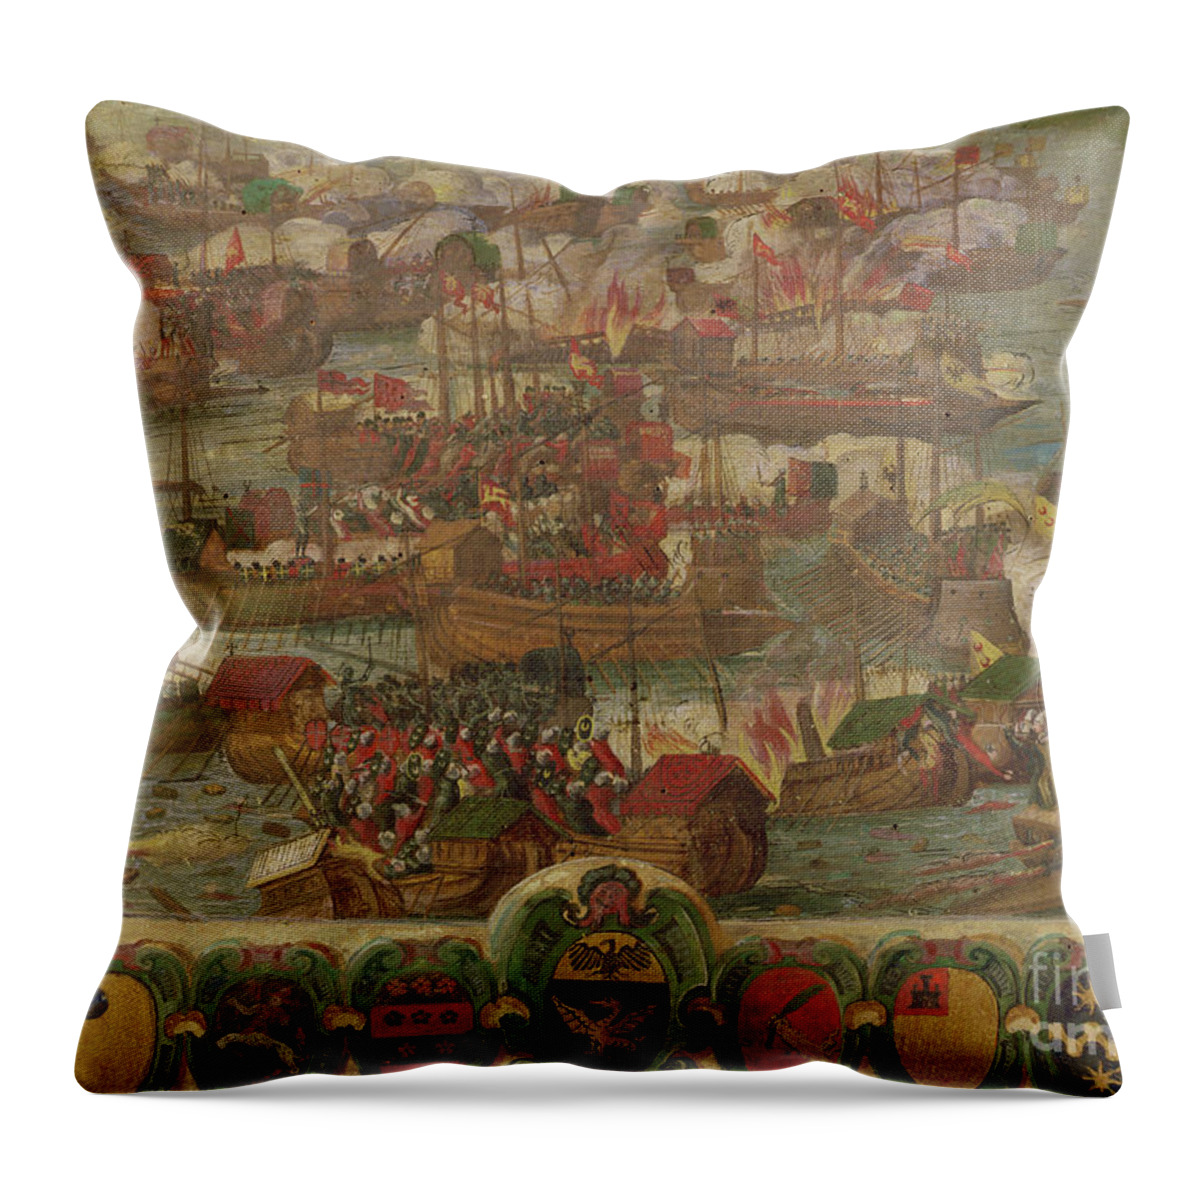 Boat Throw Pillow featuring the painting Naval Battle Of Lepanto, 1571 by Italian School